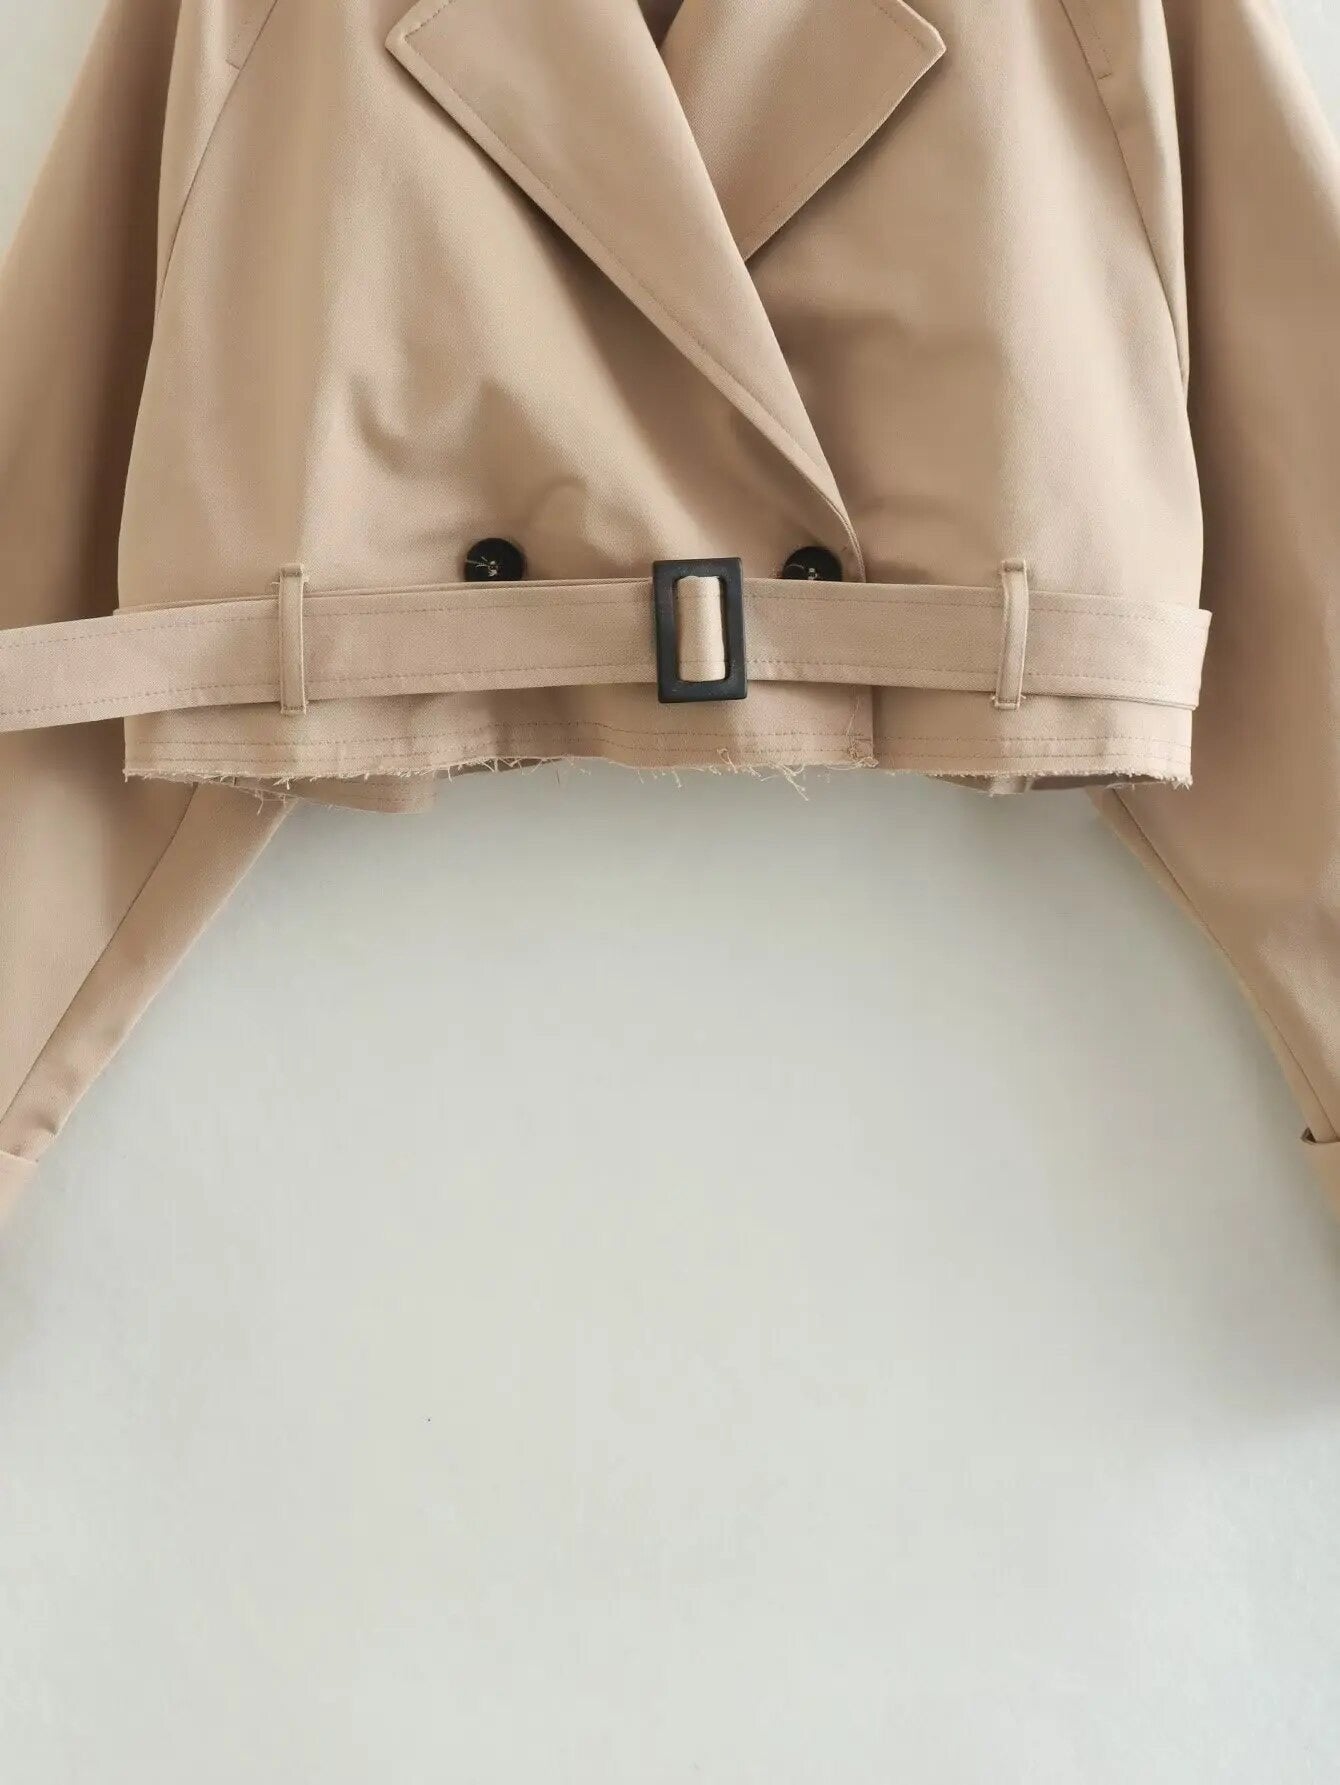 Trench Long Sleeve Cropped Jacket